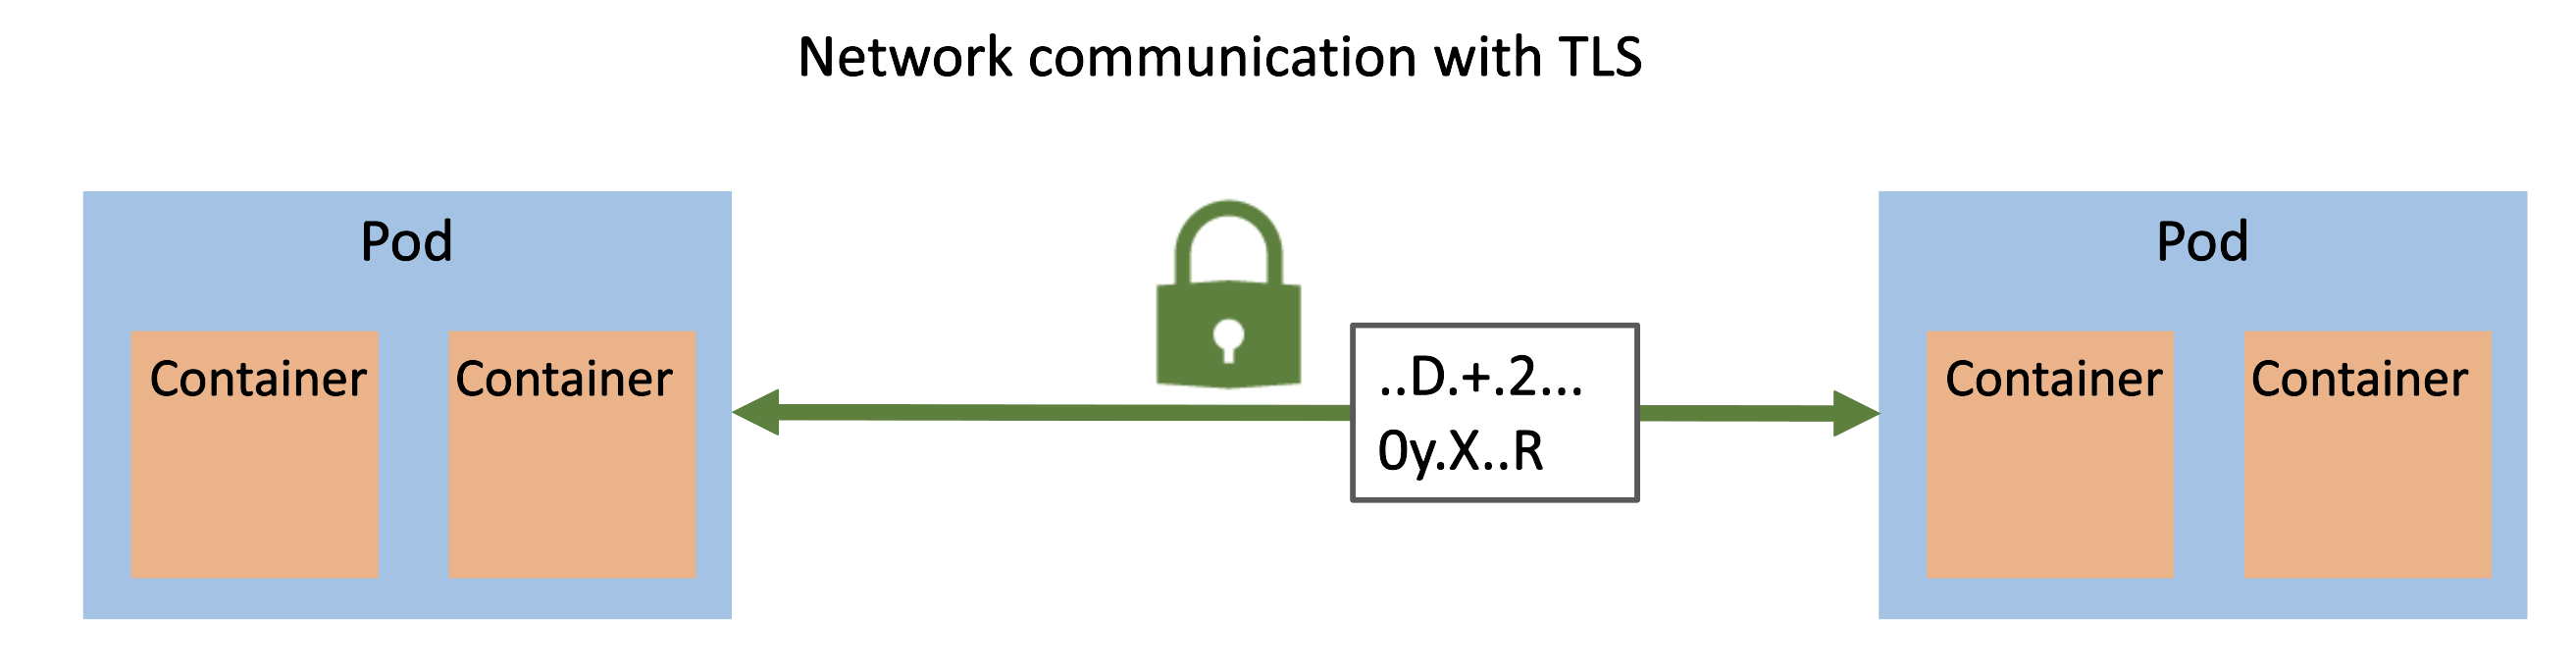 Network traffic with TLS